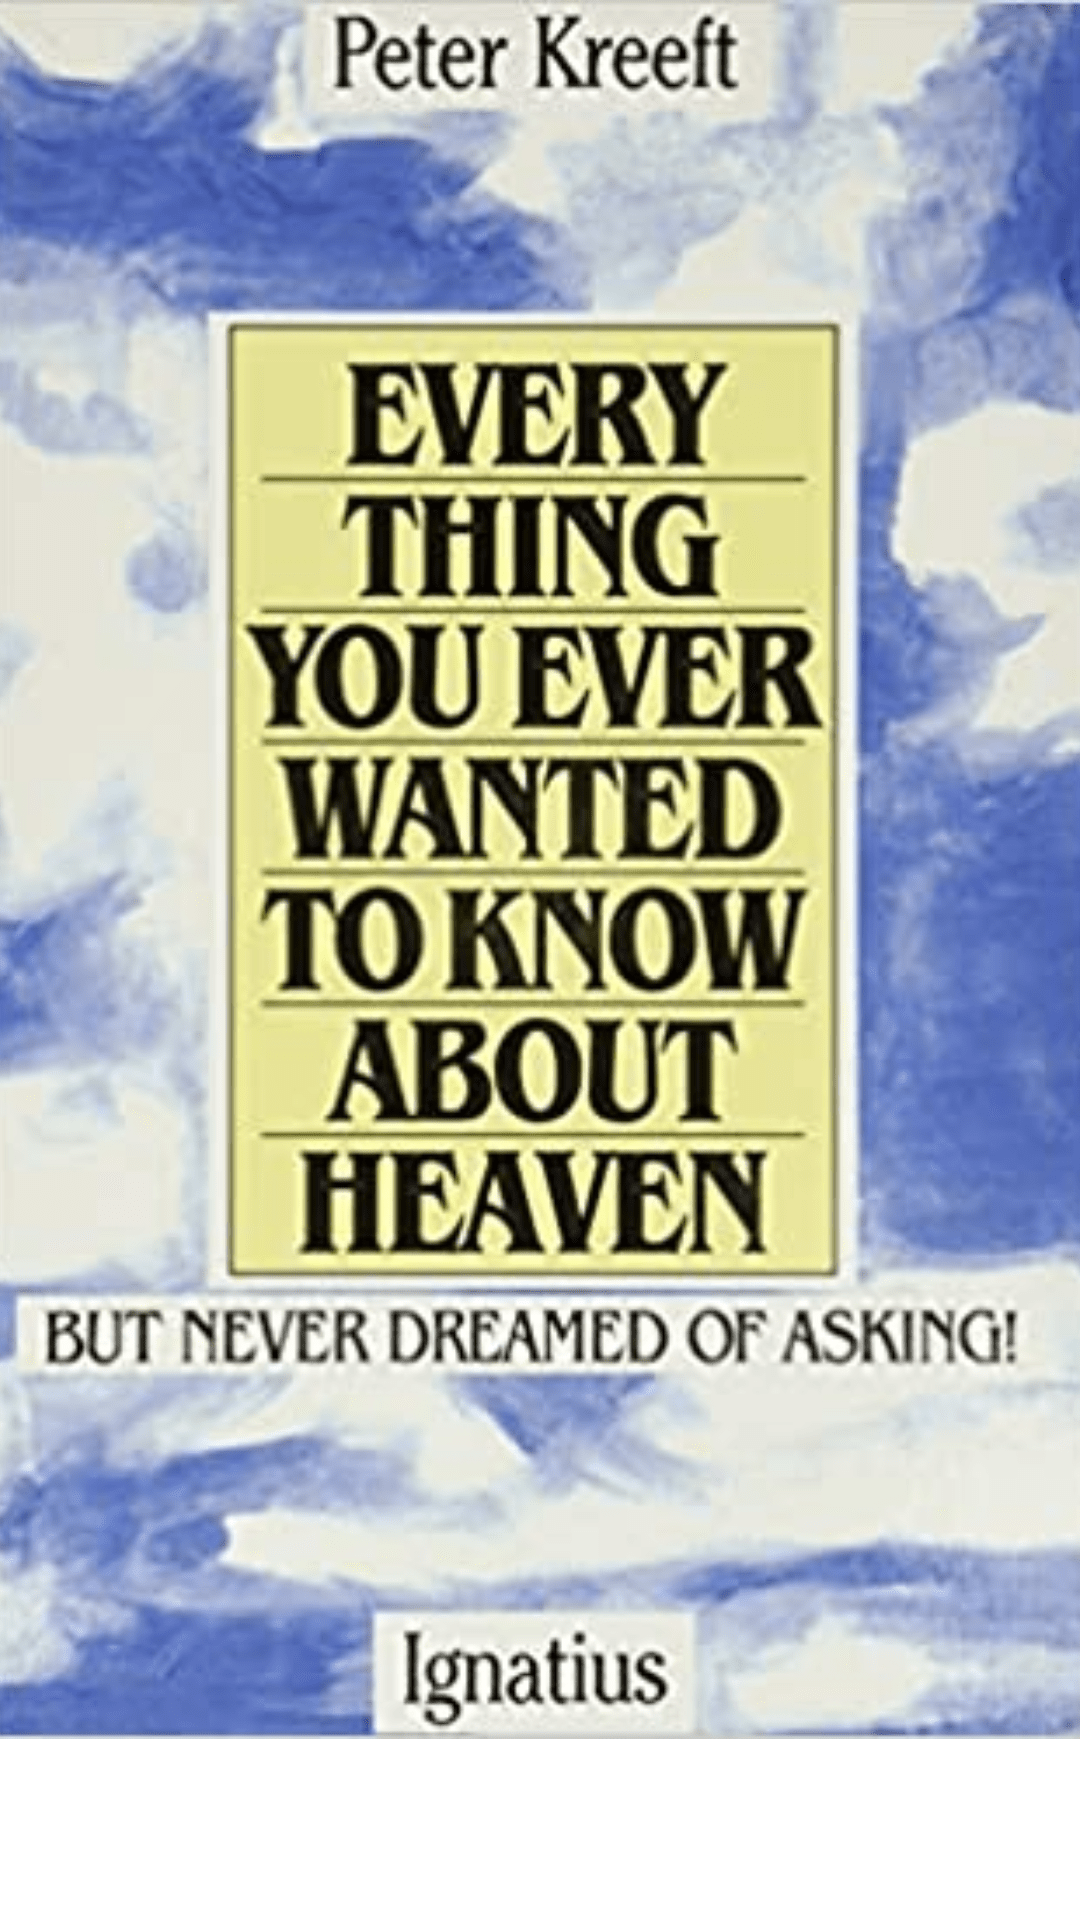 Everything You Ever Wanted to Know About Heaven: But Never Dreamed of Asking